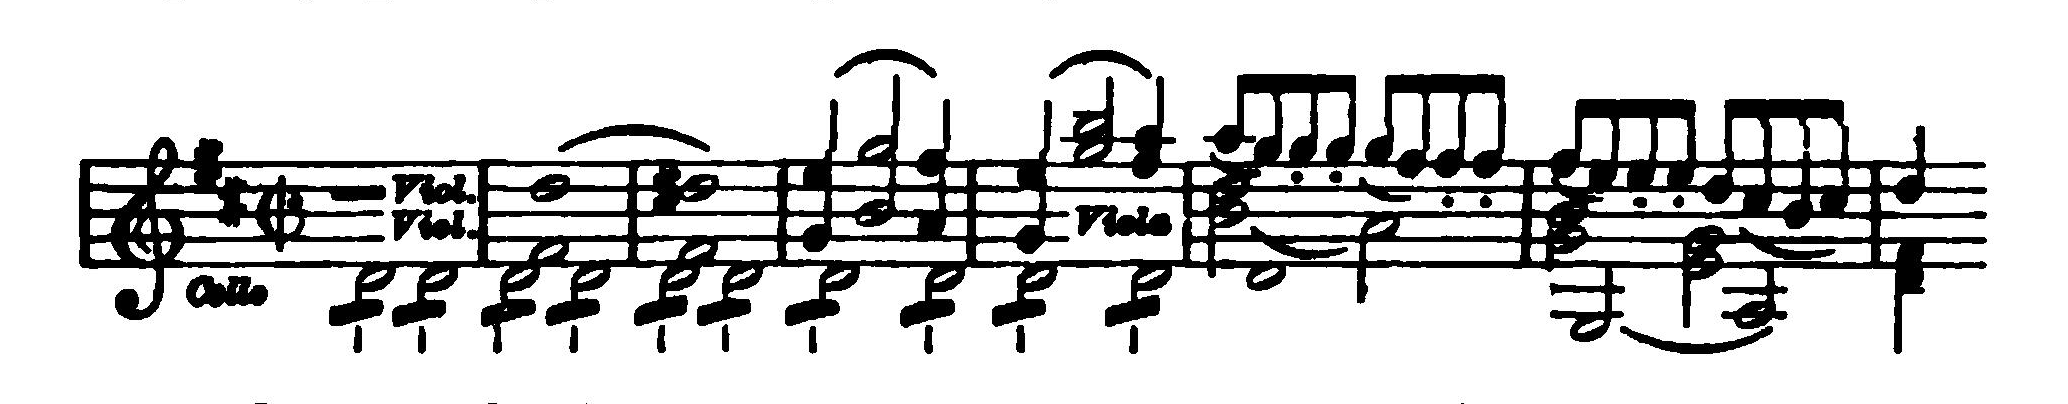 The music notation as it appears in page scans